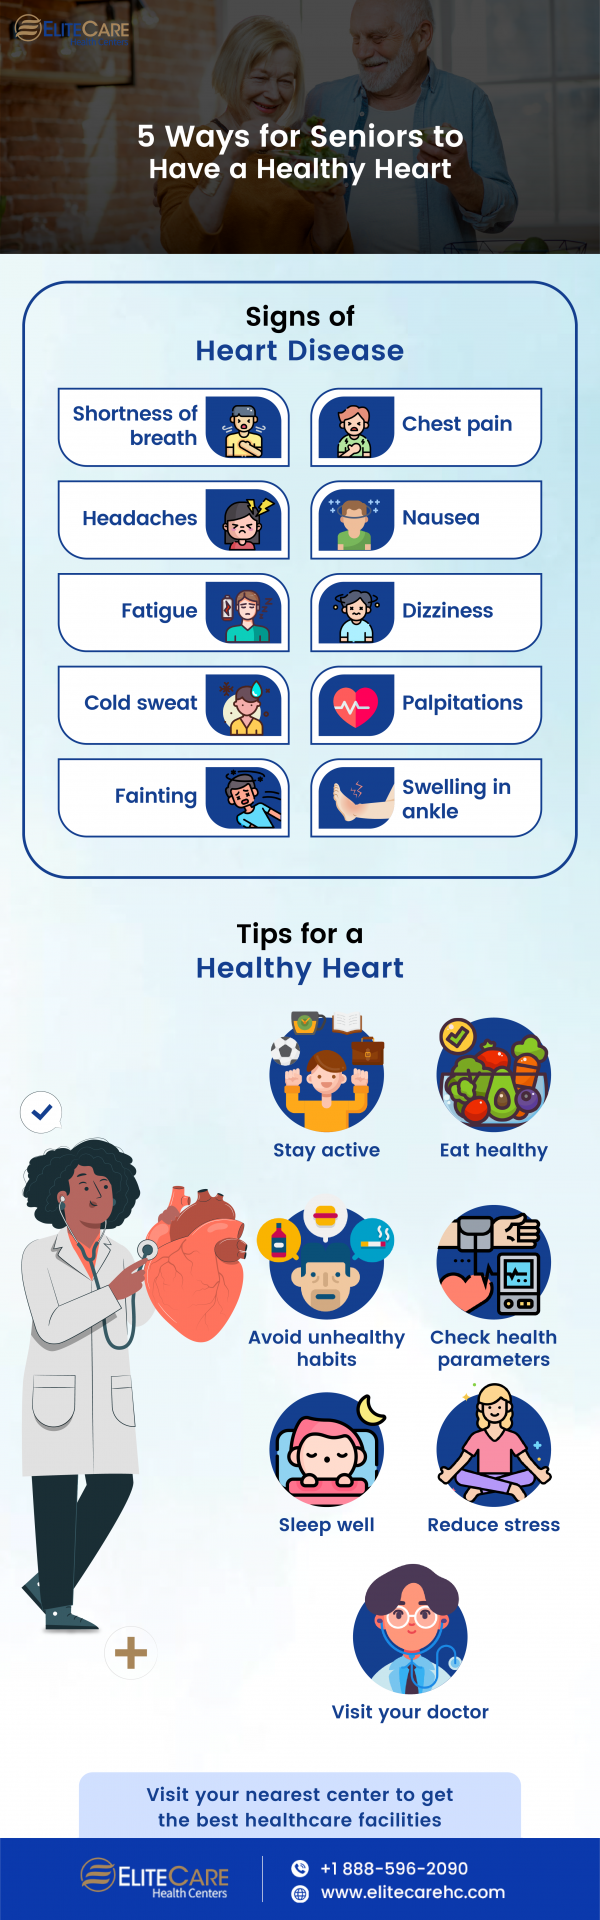 5 Ways for Seniors to Have a Healthy Heart | Infographic